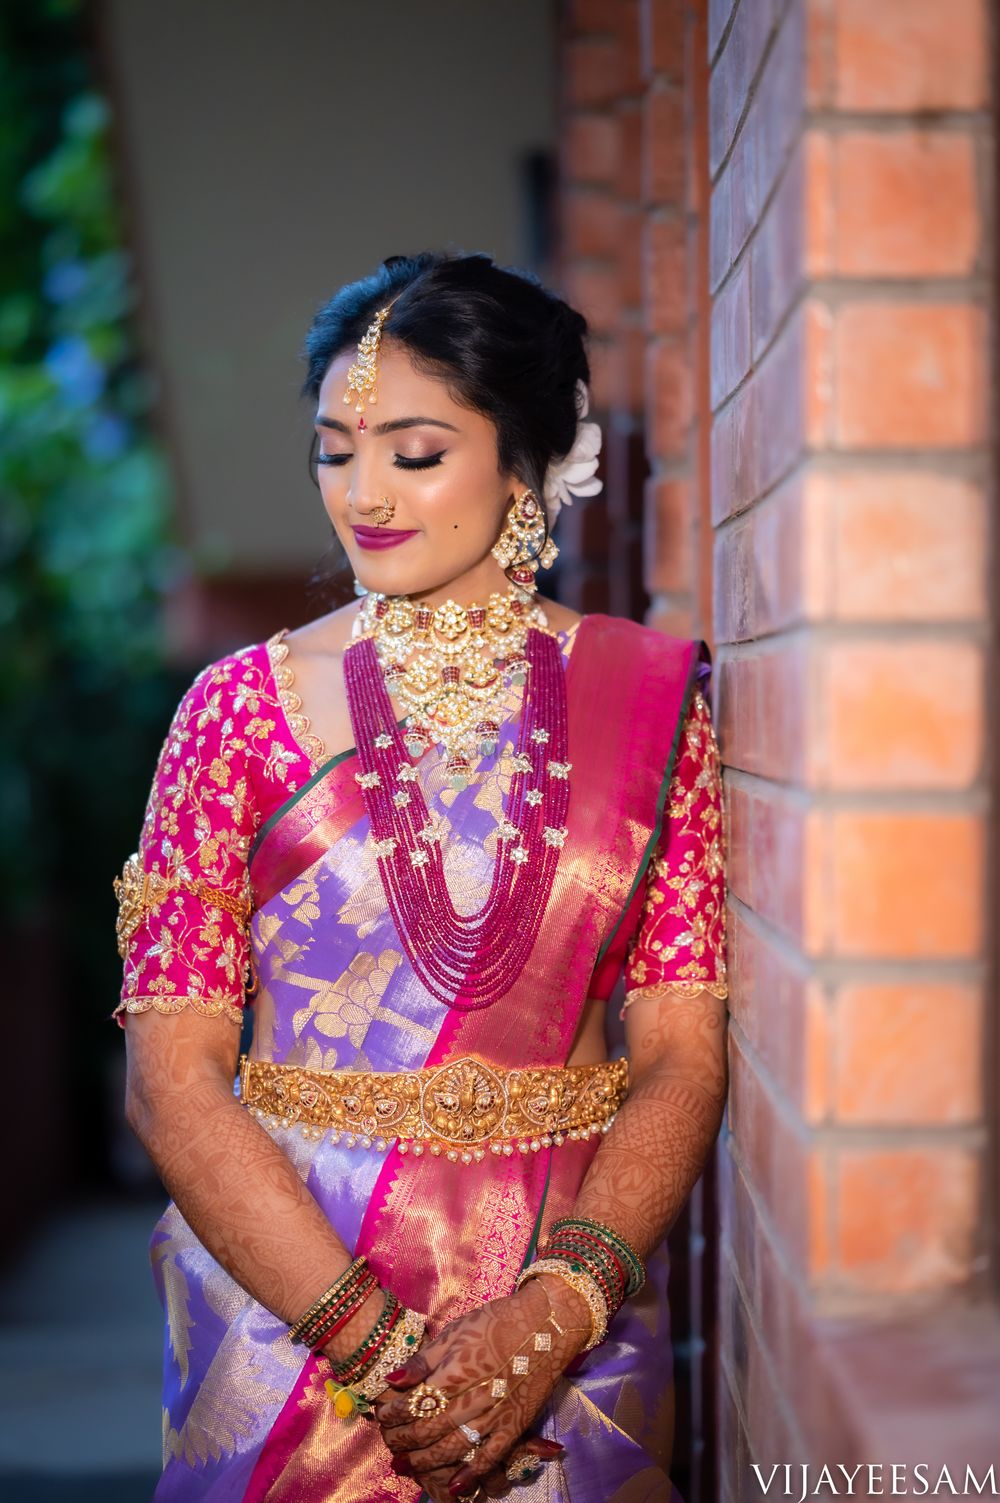 Photo of A south Indian bride dressed in a lavender and pink saree.